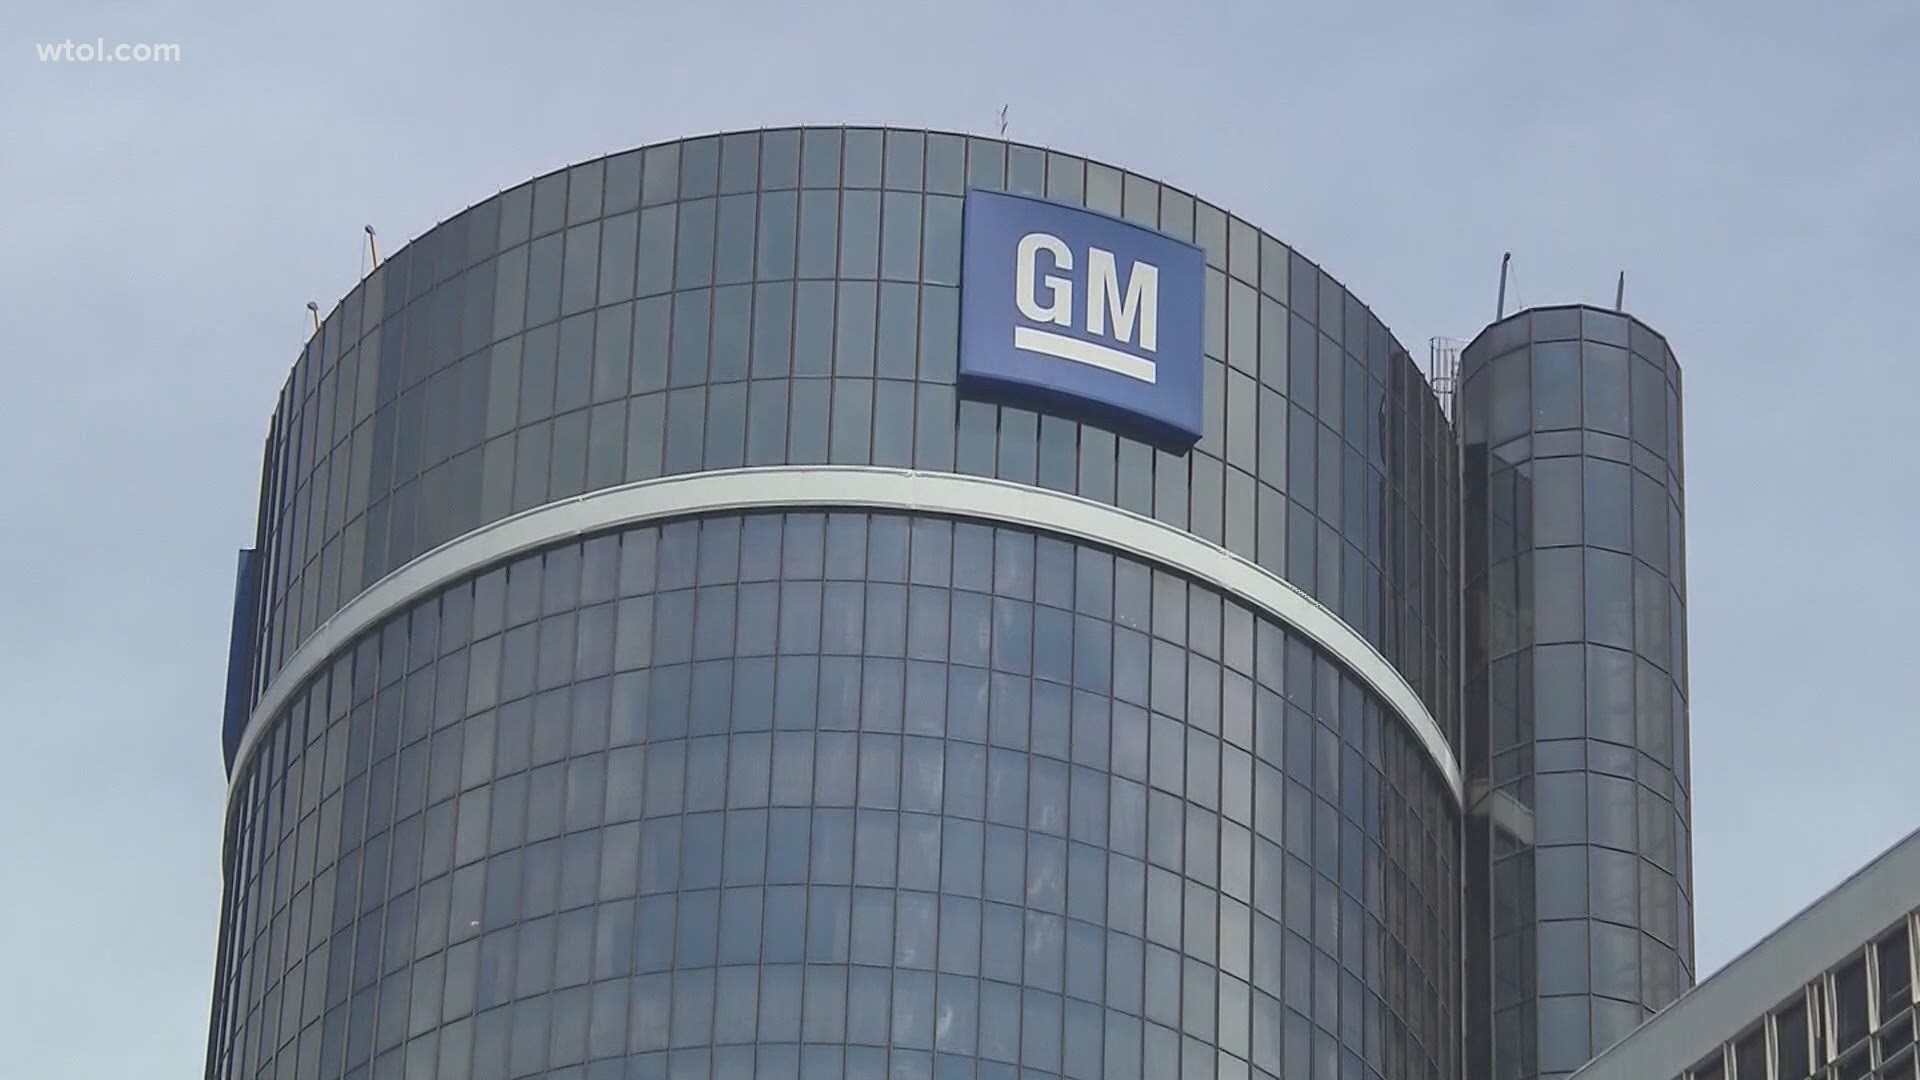 A representative at GM explained the automakers move to an environmentally-friendly future on Saturday and why they feel they're the best ones to make it happen.